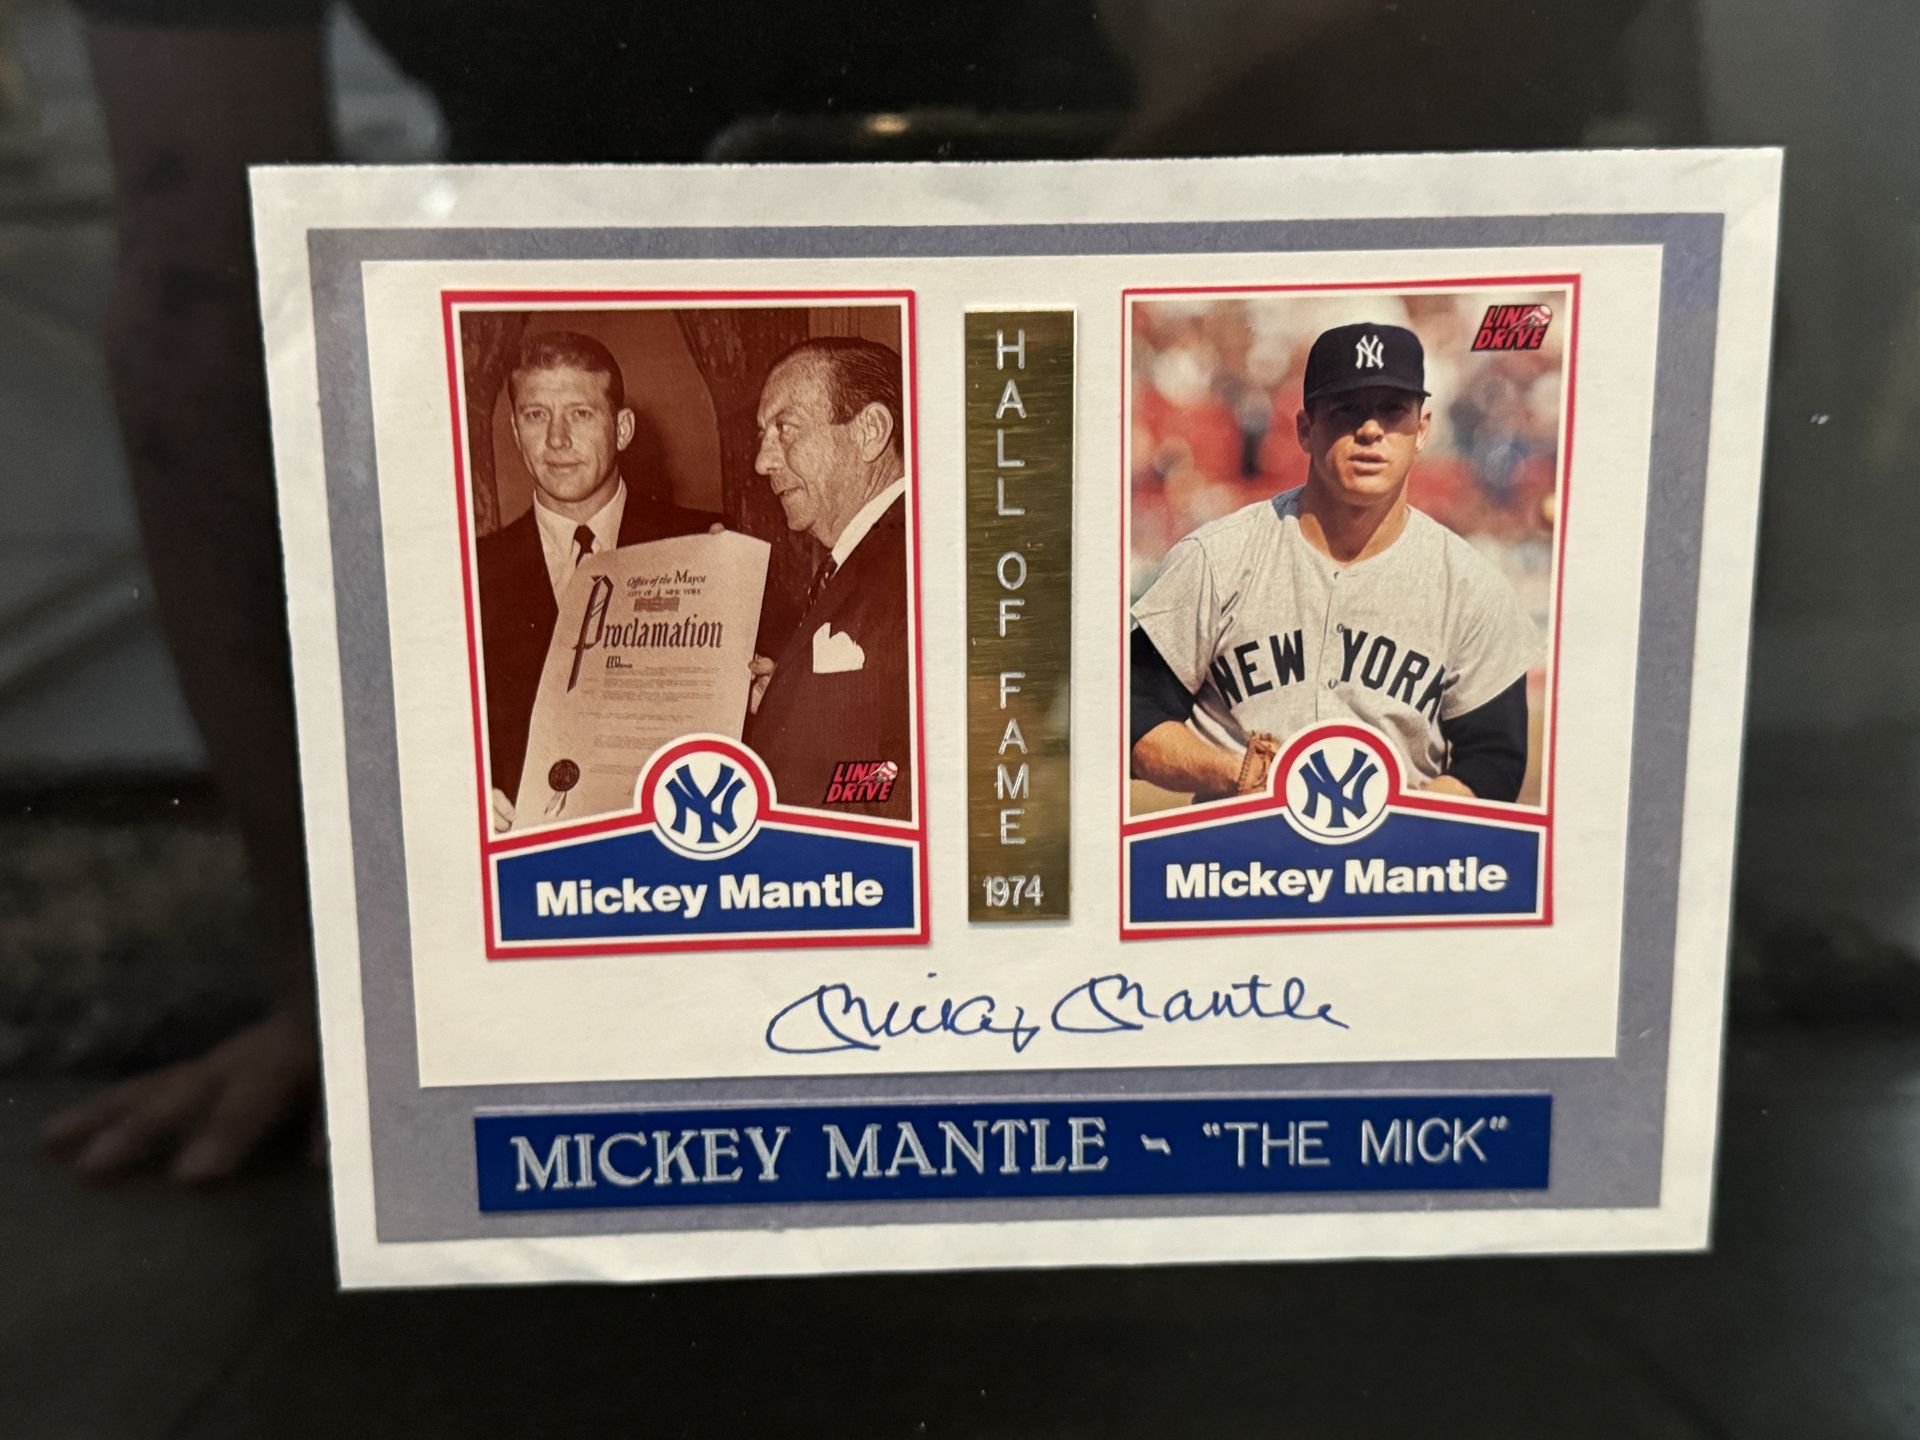 FRAME SIGNED BY MICKEY MANTLE - BASEBALL HALL OF FAME 1974 - Image 2 of 2